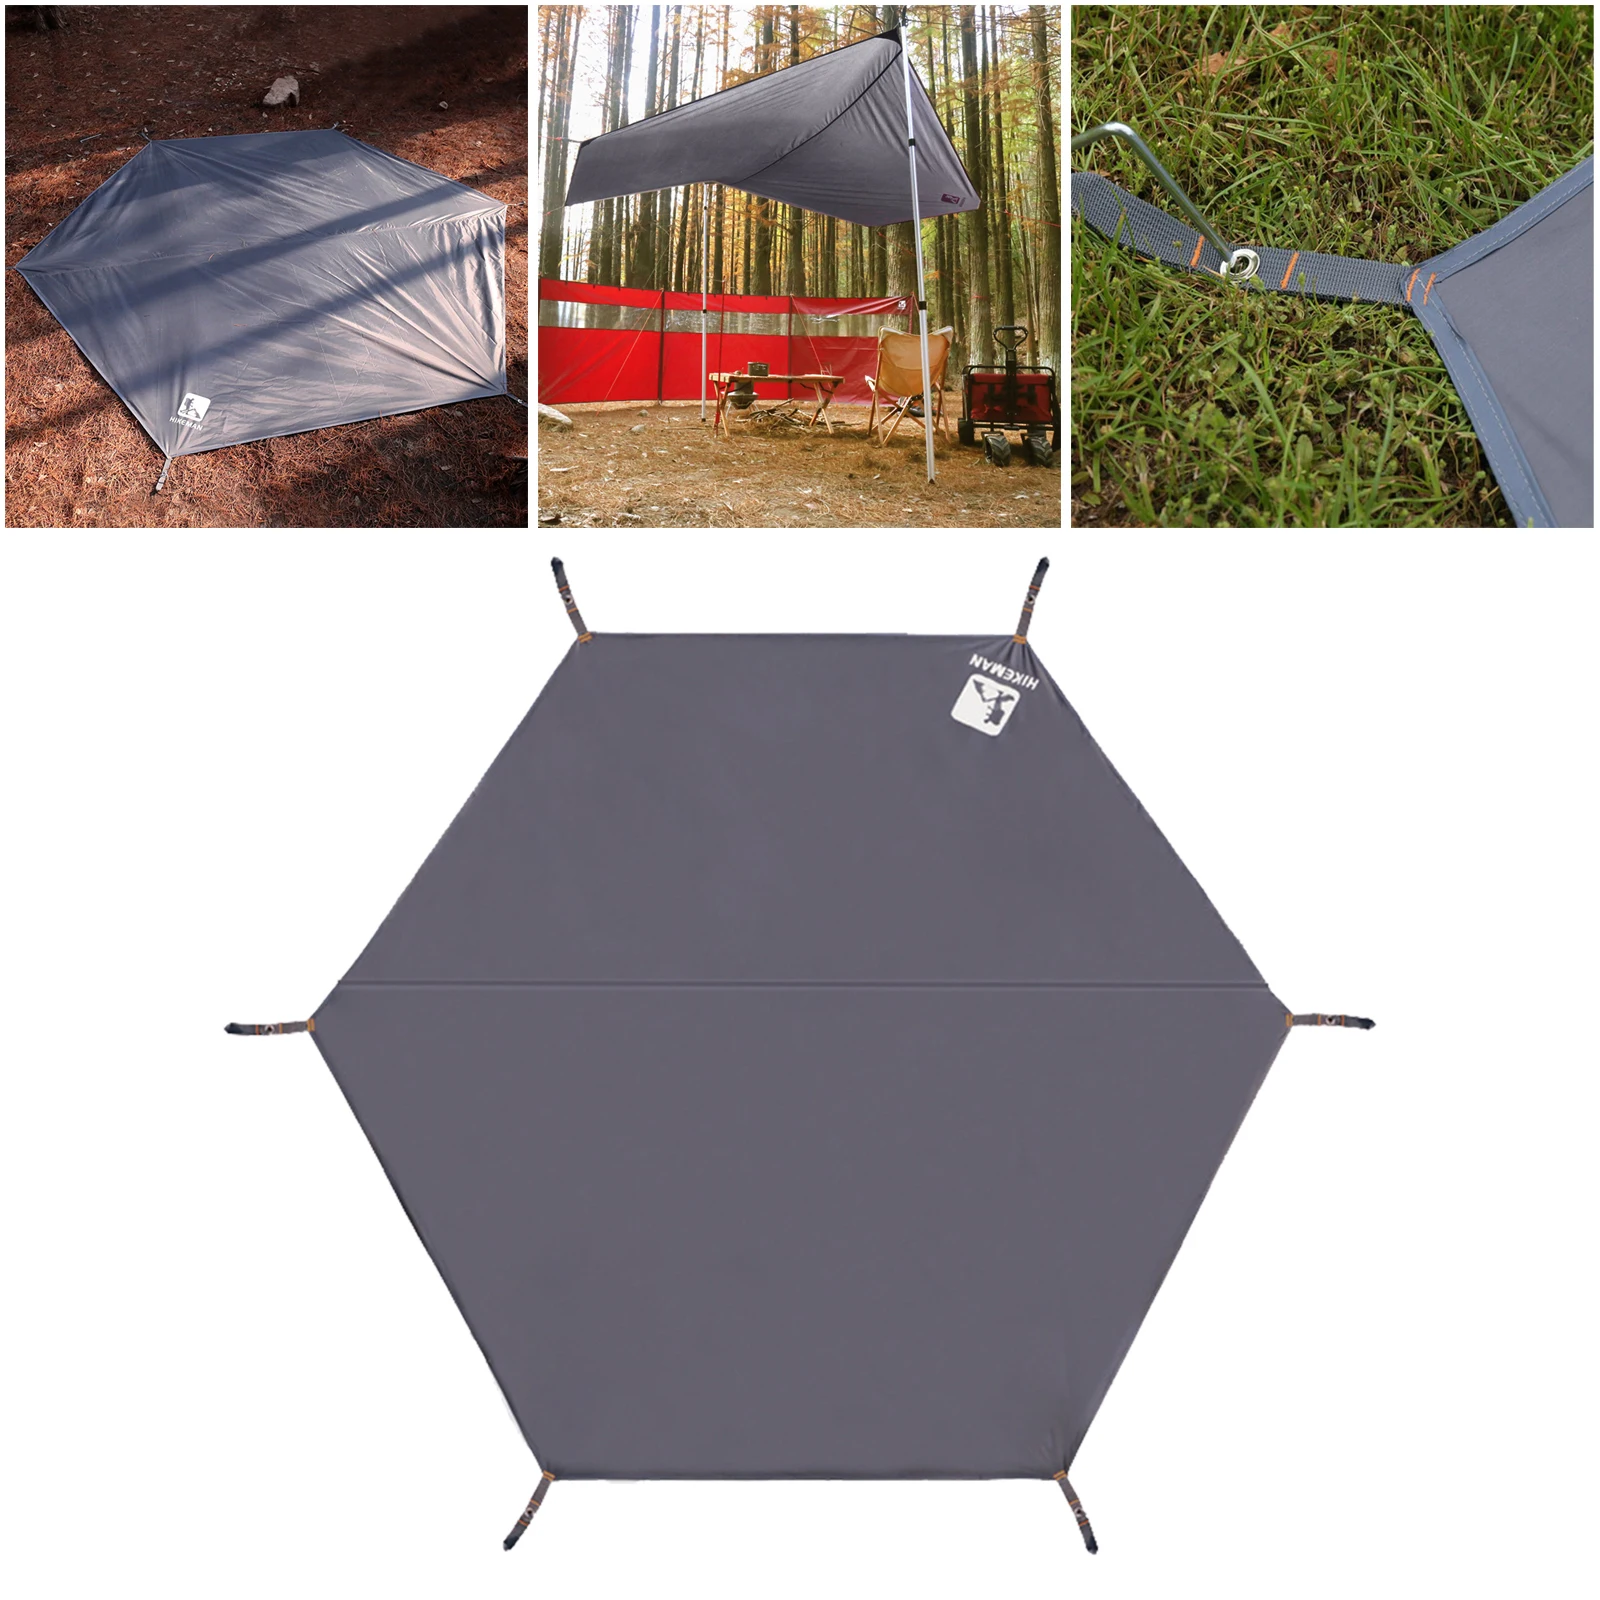 Lightweight Tent Footprint PU 2000mm Waterproof Camping Tent Tarp with Drawstring Carrying Bag for Ground Camping Hiking